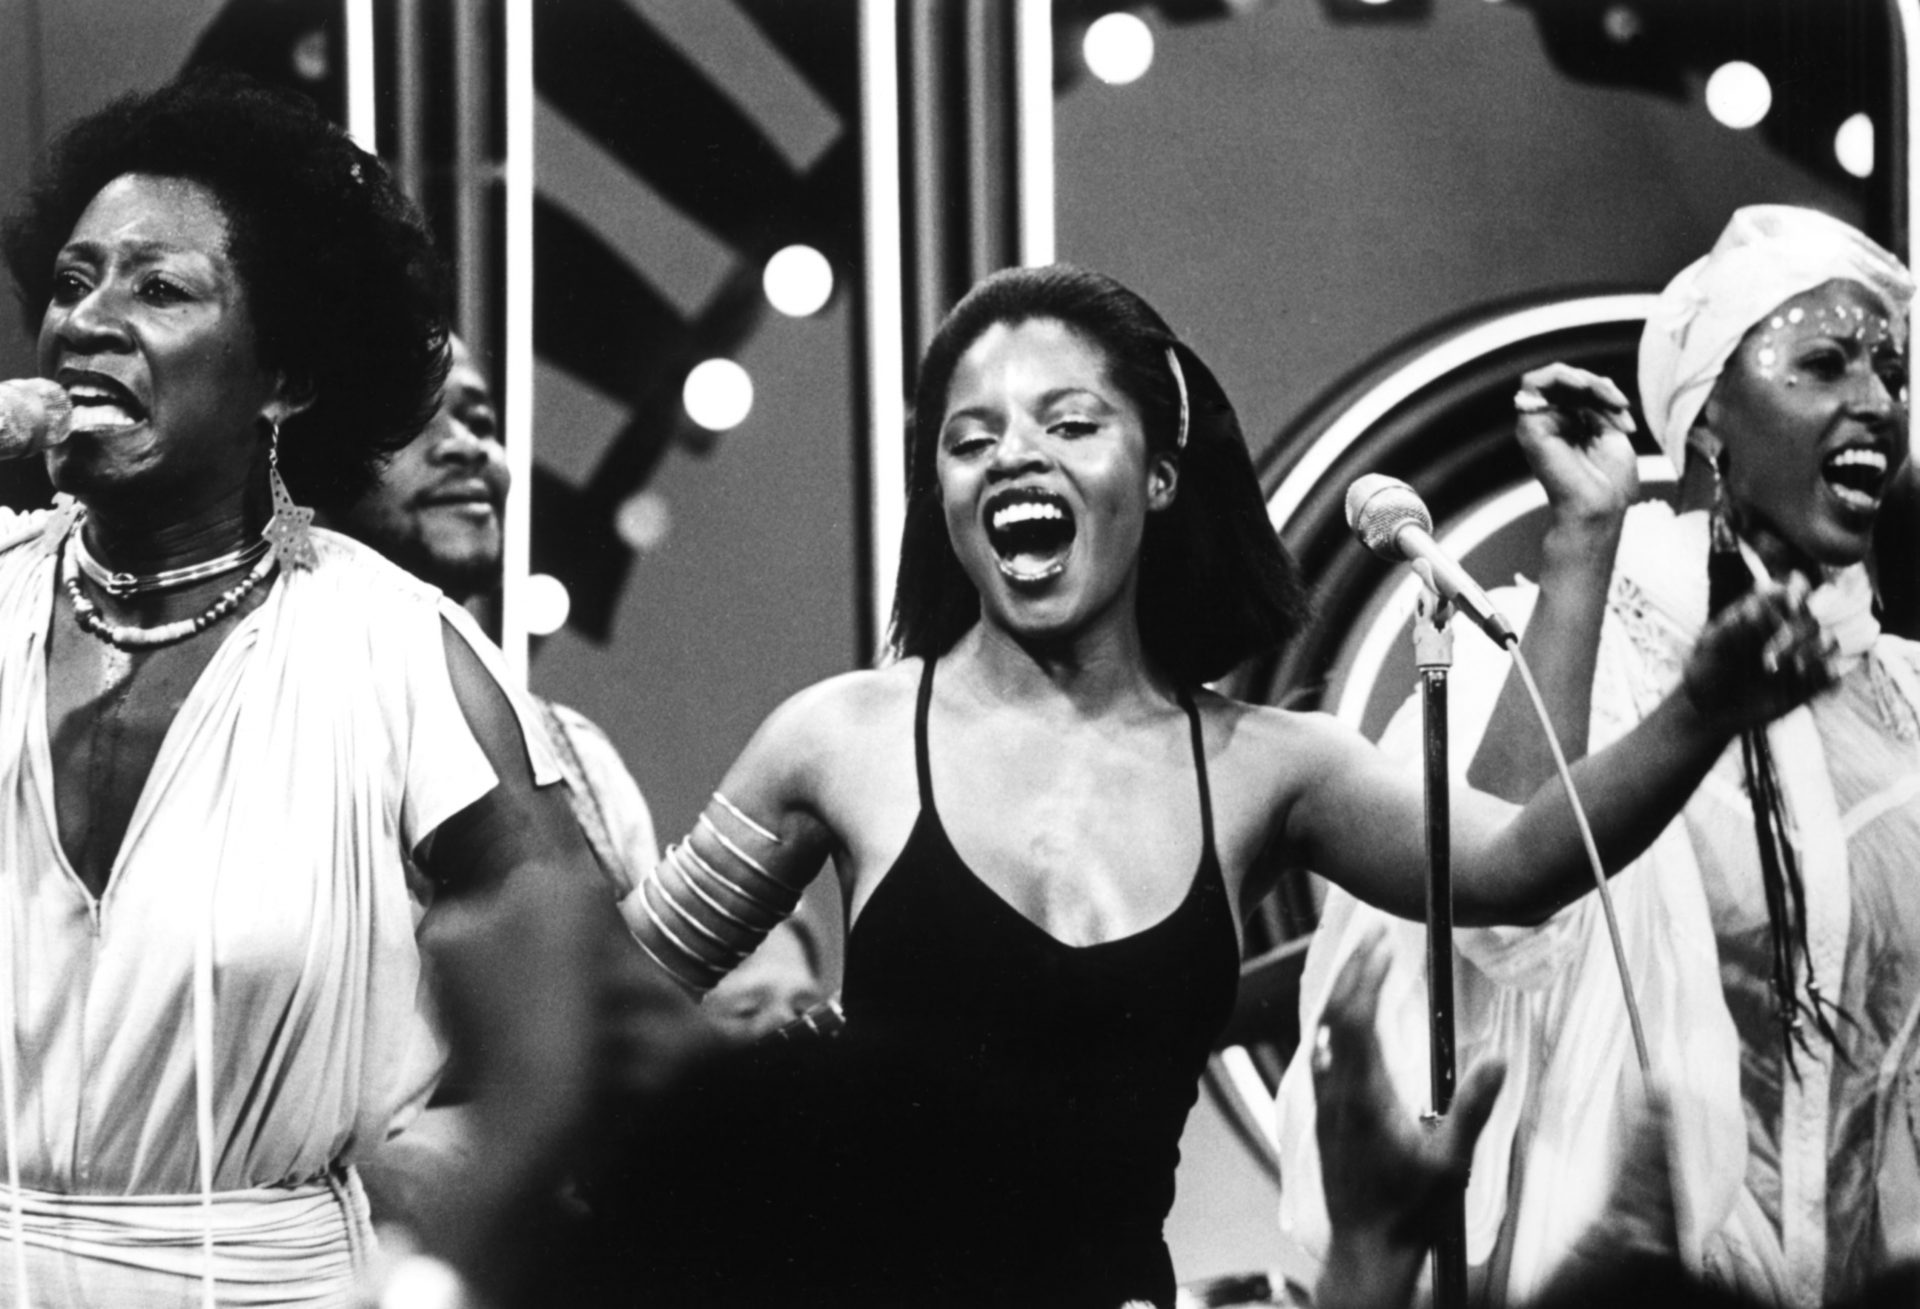 Sarah Speed Dies: Groundbreaking ‘Lady Marmalade’ Singer, LaBelle Co-Founder And Actress Used to be 76